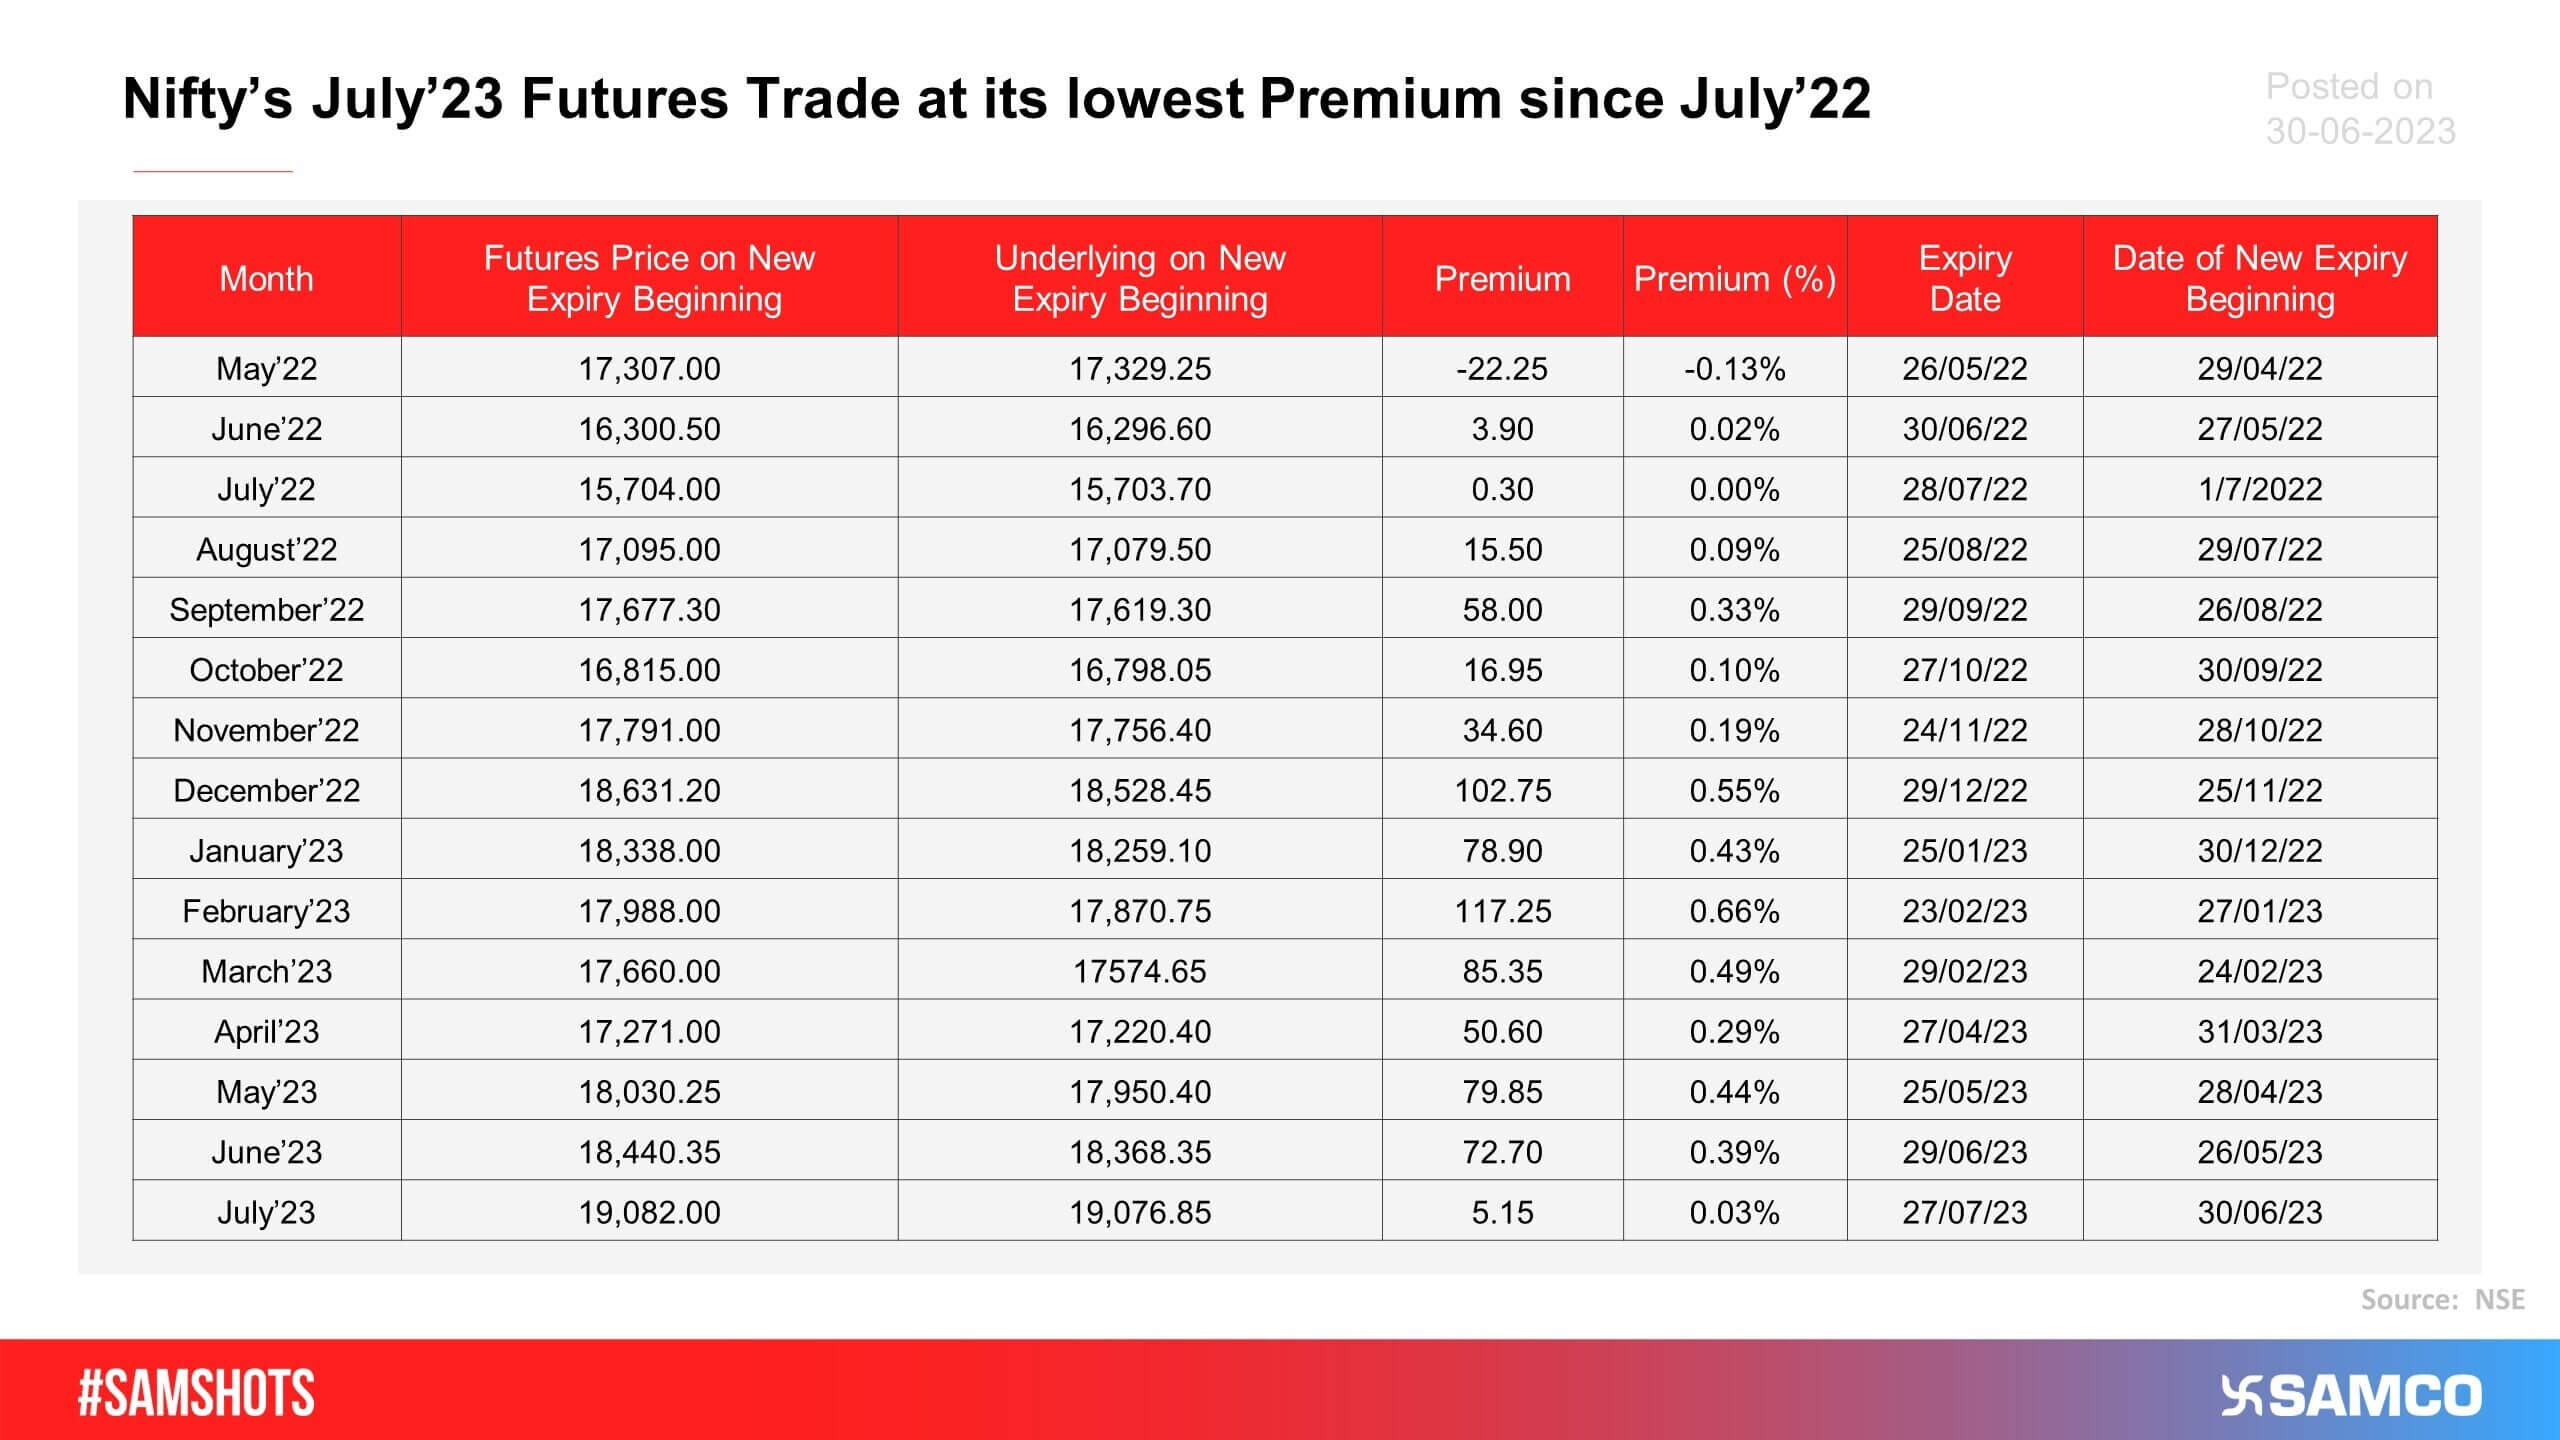 The below table reveals how Nifty’s premiums are reflected 1 month before the next monthly expiry.